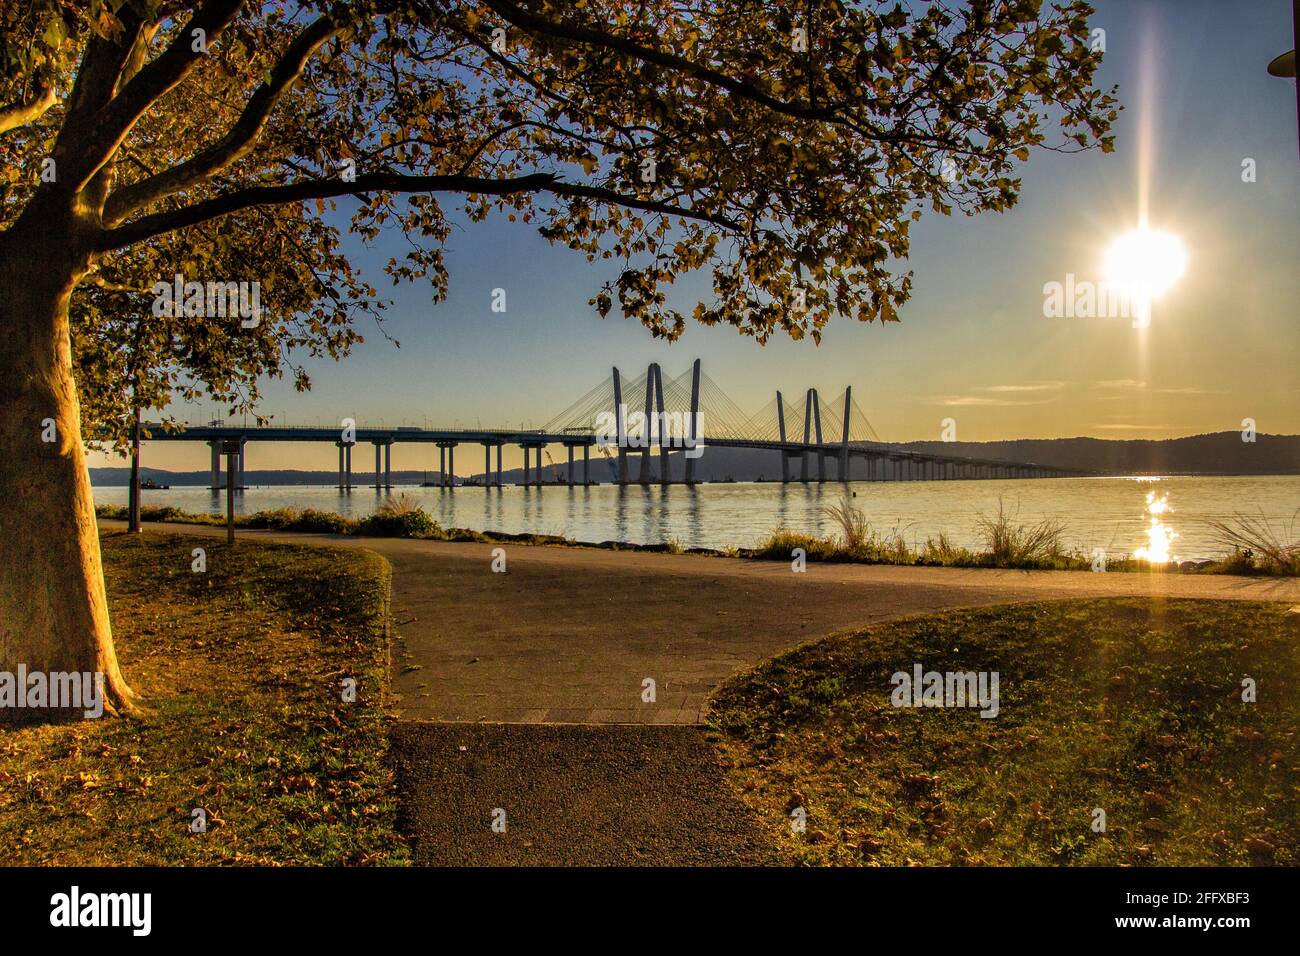 Tarrytown, NY / United States - Sept. 19, 2019: a landscape image of Pierson Park at sunset over the Hudson River. Stock Photo